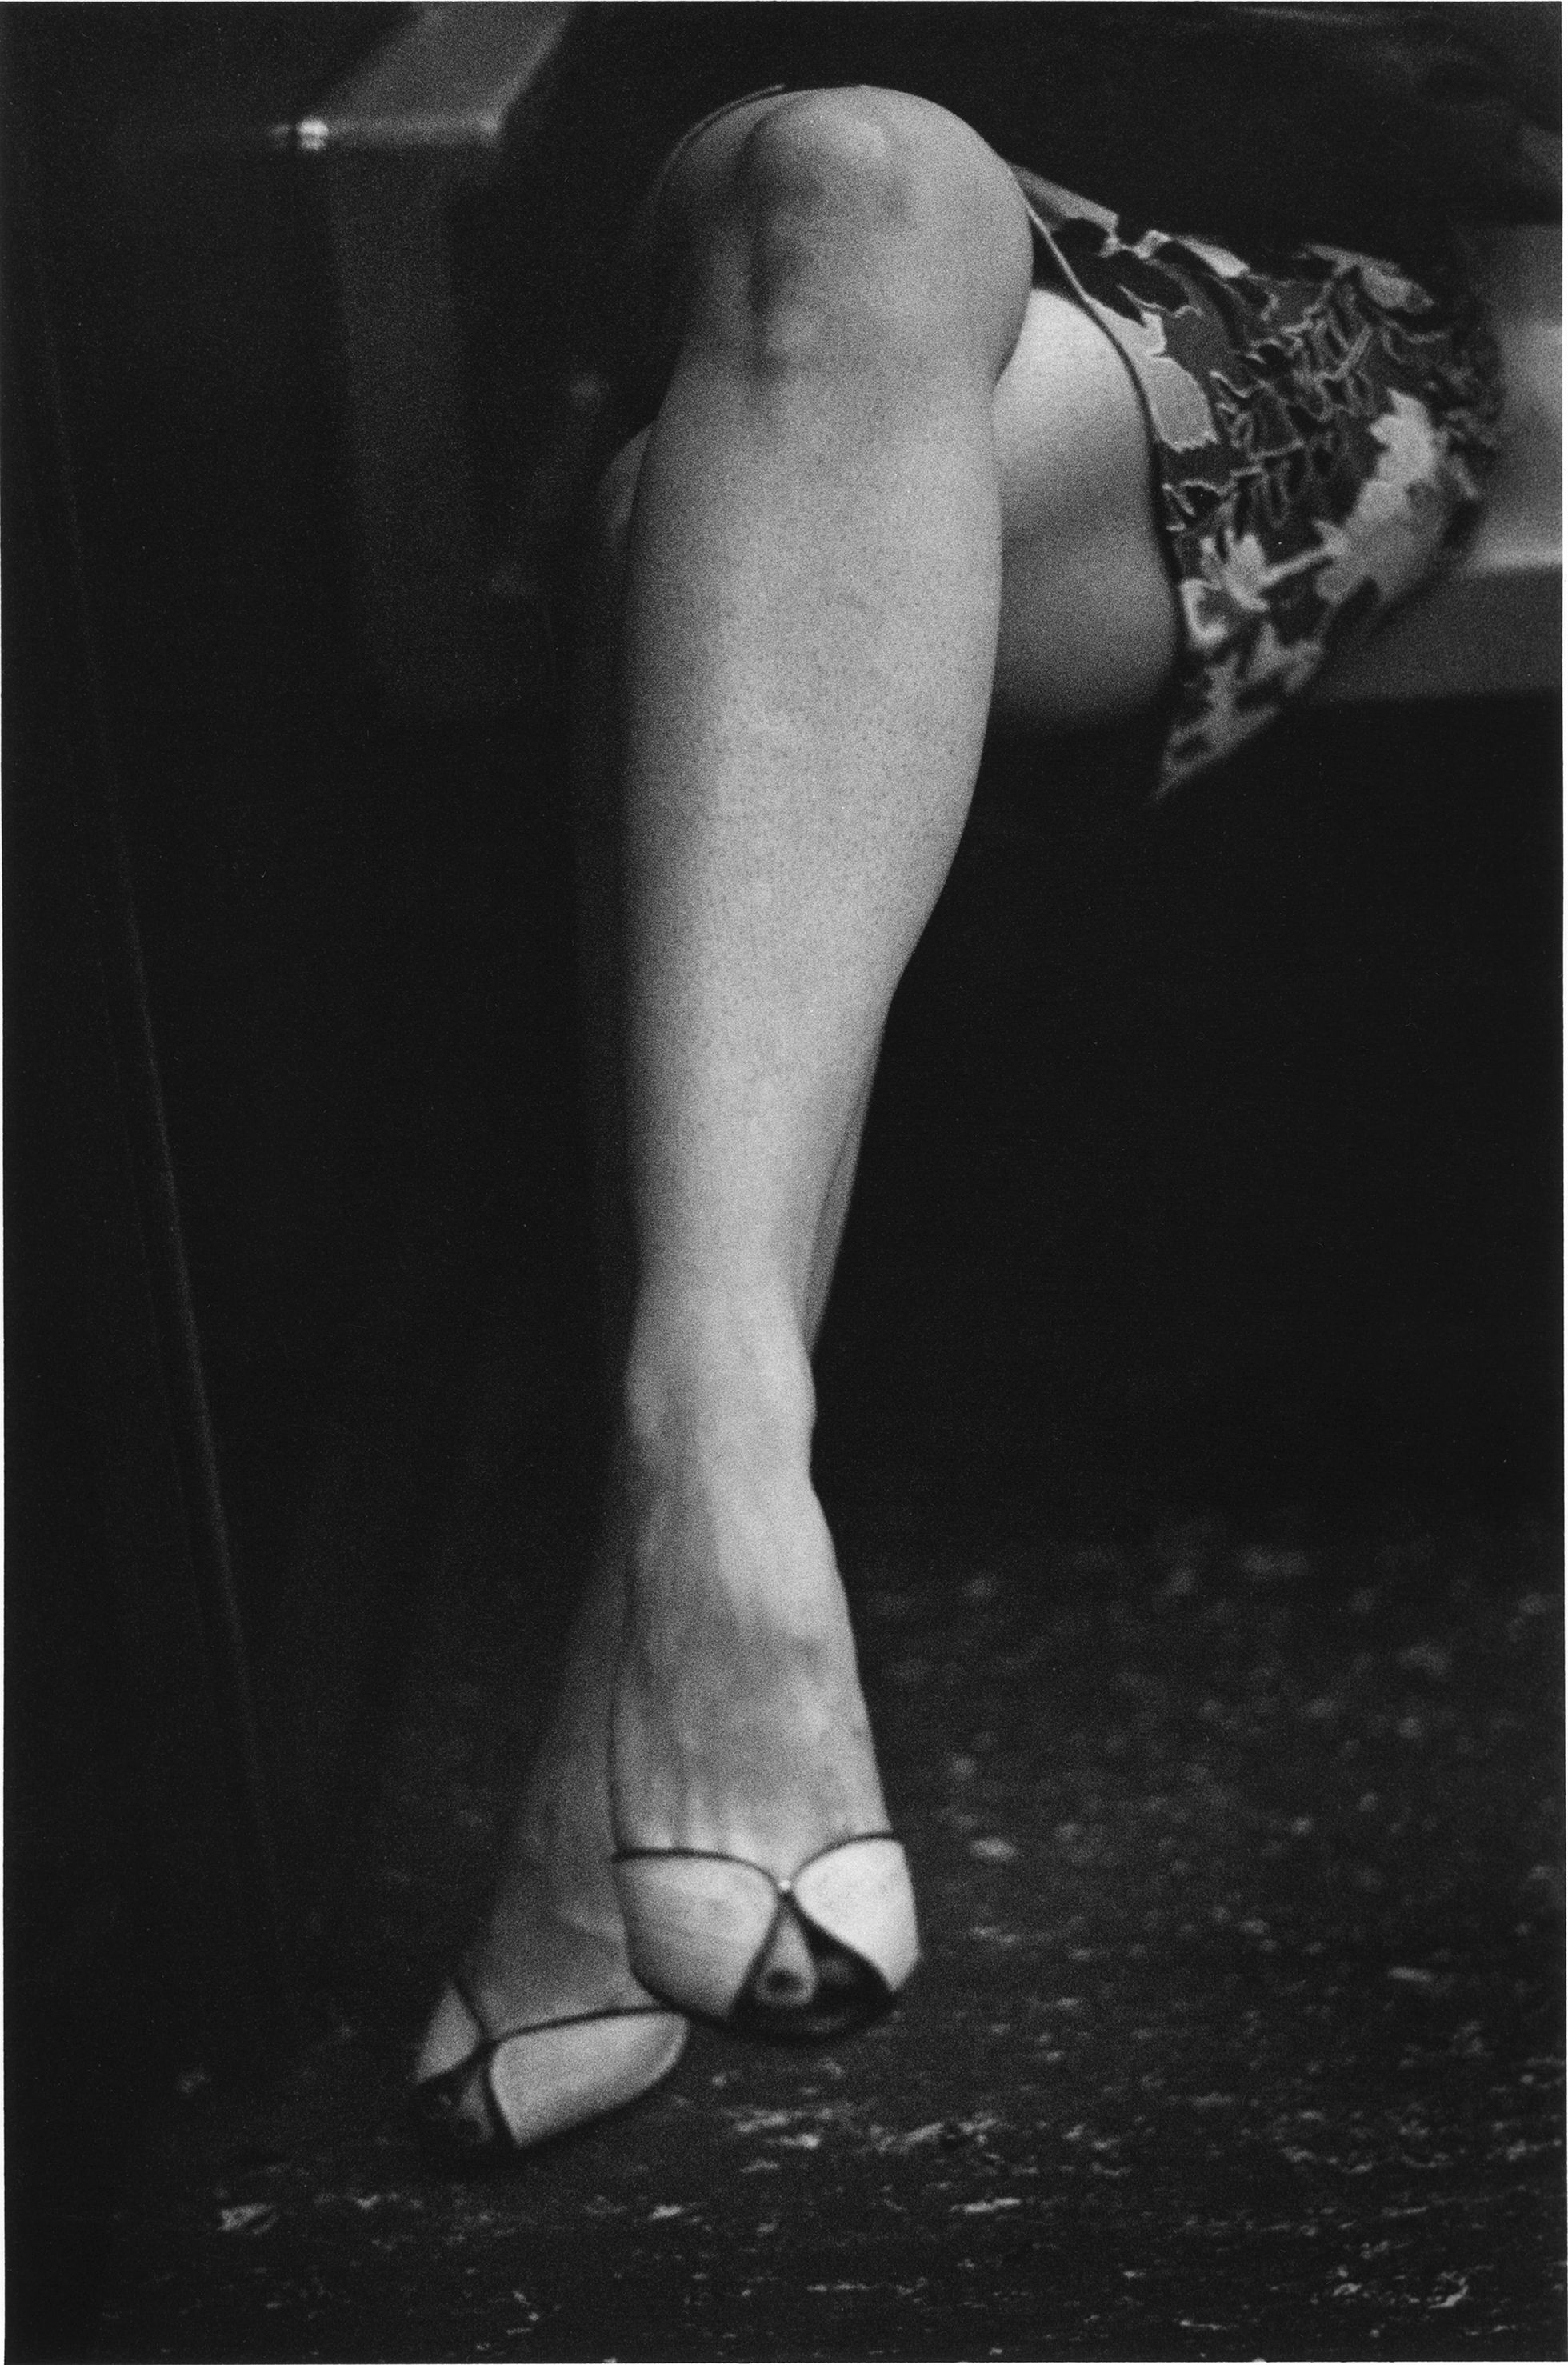 A close-up of a woman’s crossed, bare legs. A leaf-print skirt is visible and she is wearing peep-toe shoes.